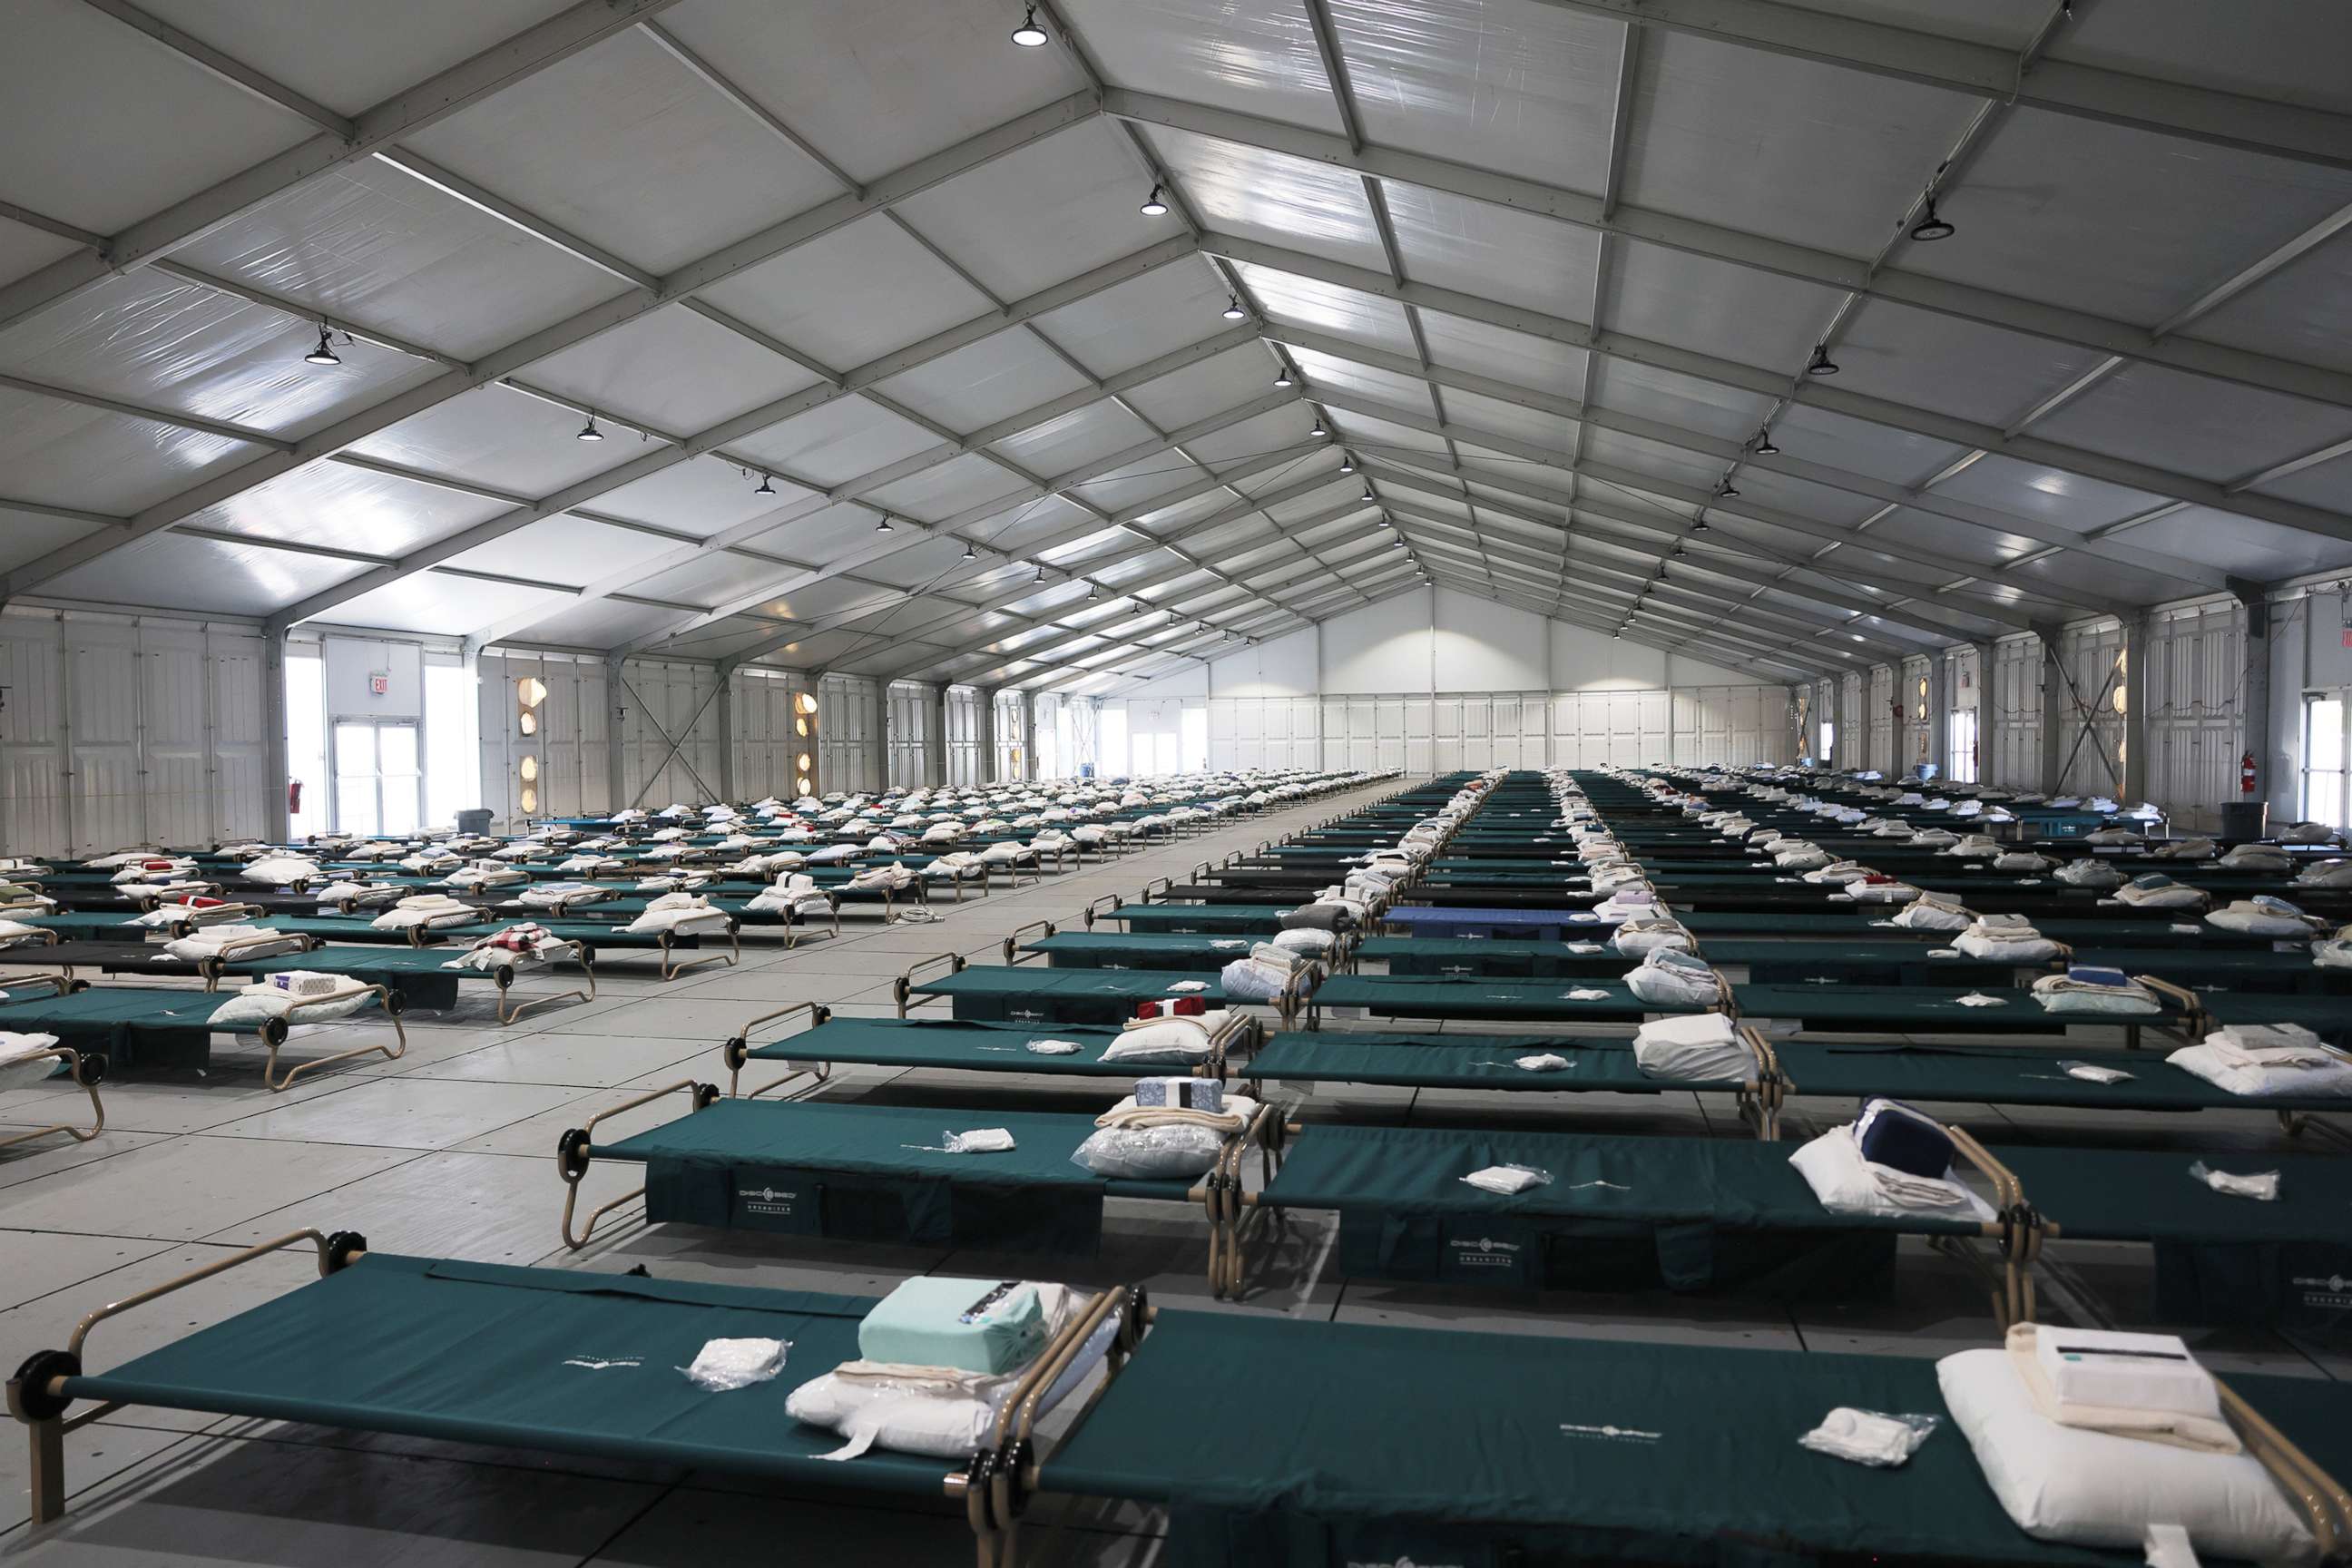 PHOTO: Beds are seen in the dormitory at the Randall's Island Humanitarian Emergency Response and Relief Center, Oct. 18, 2022, in New York City.